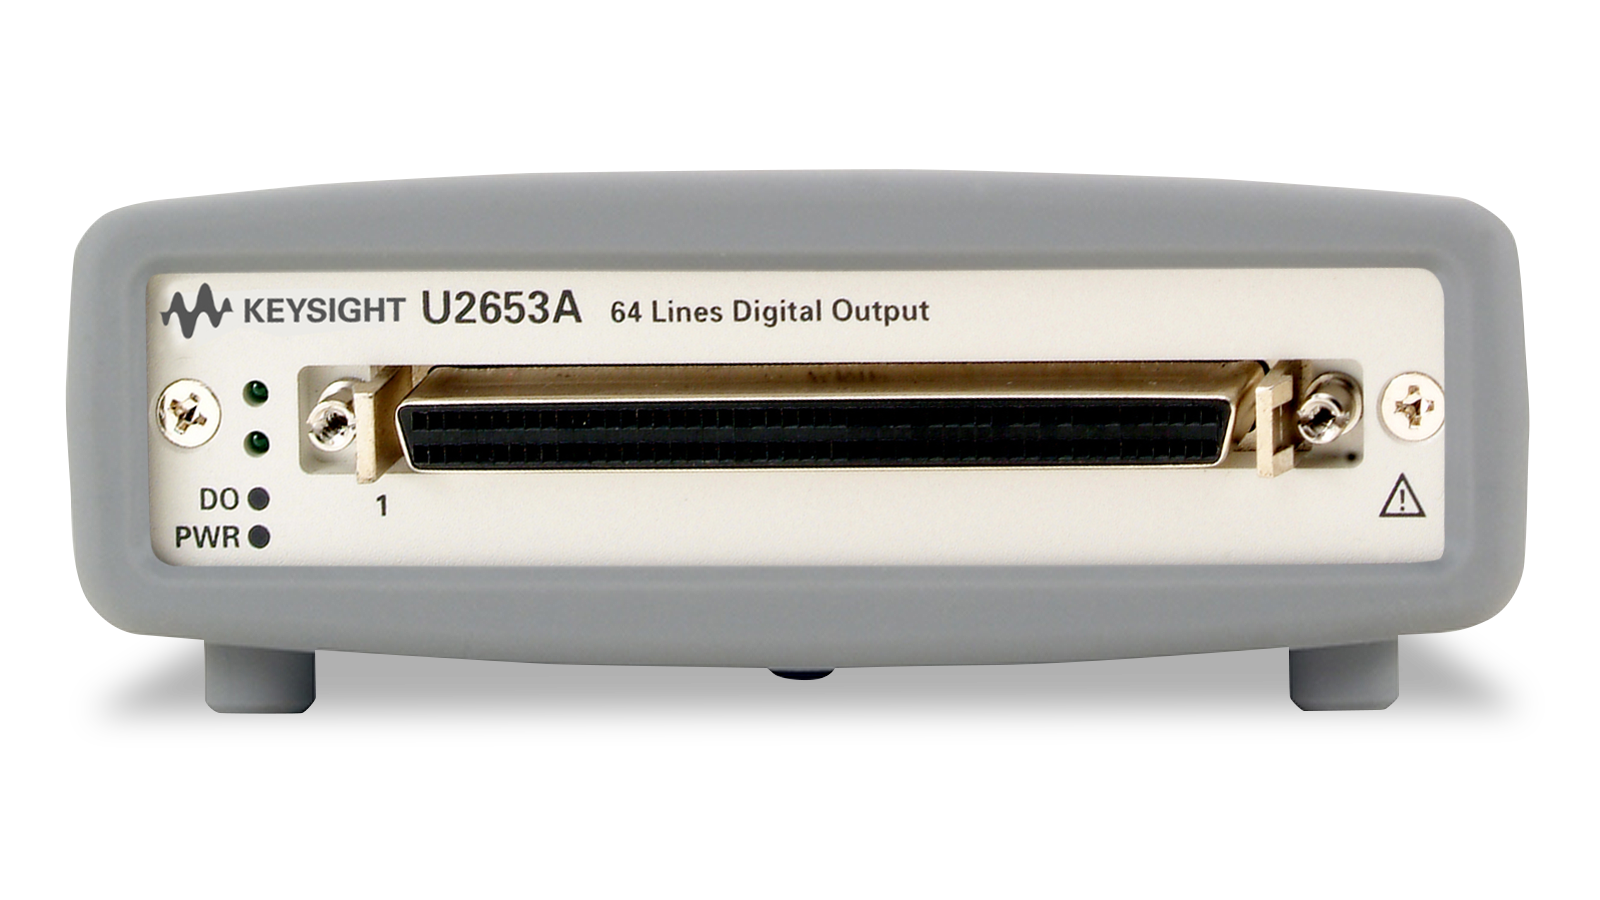 U2600A front view